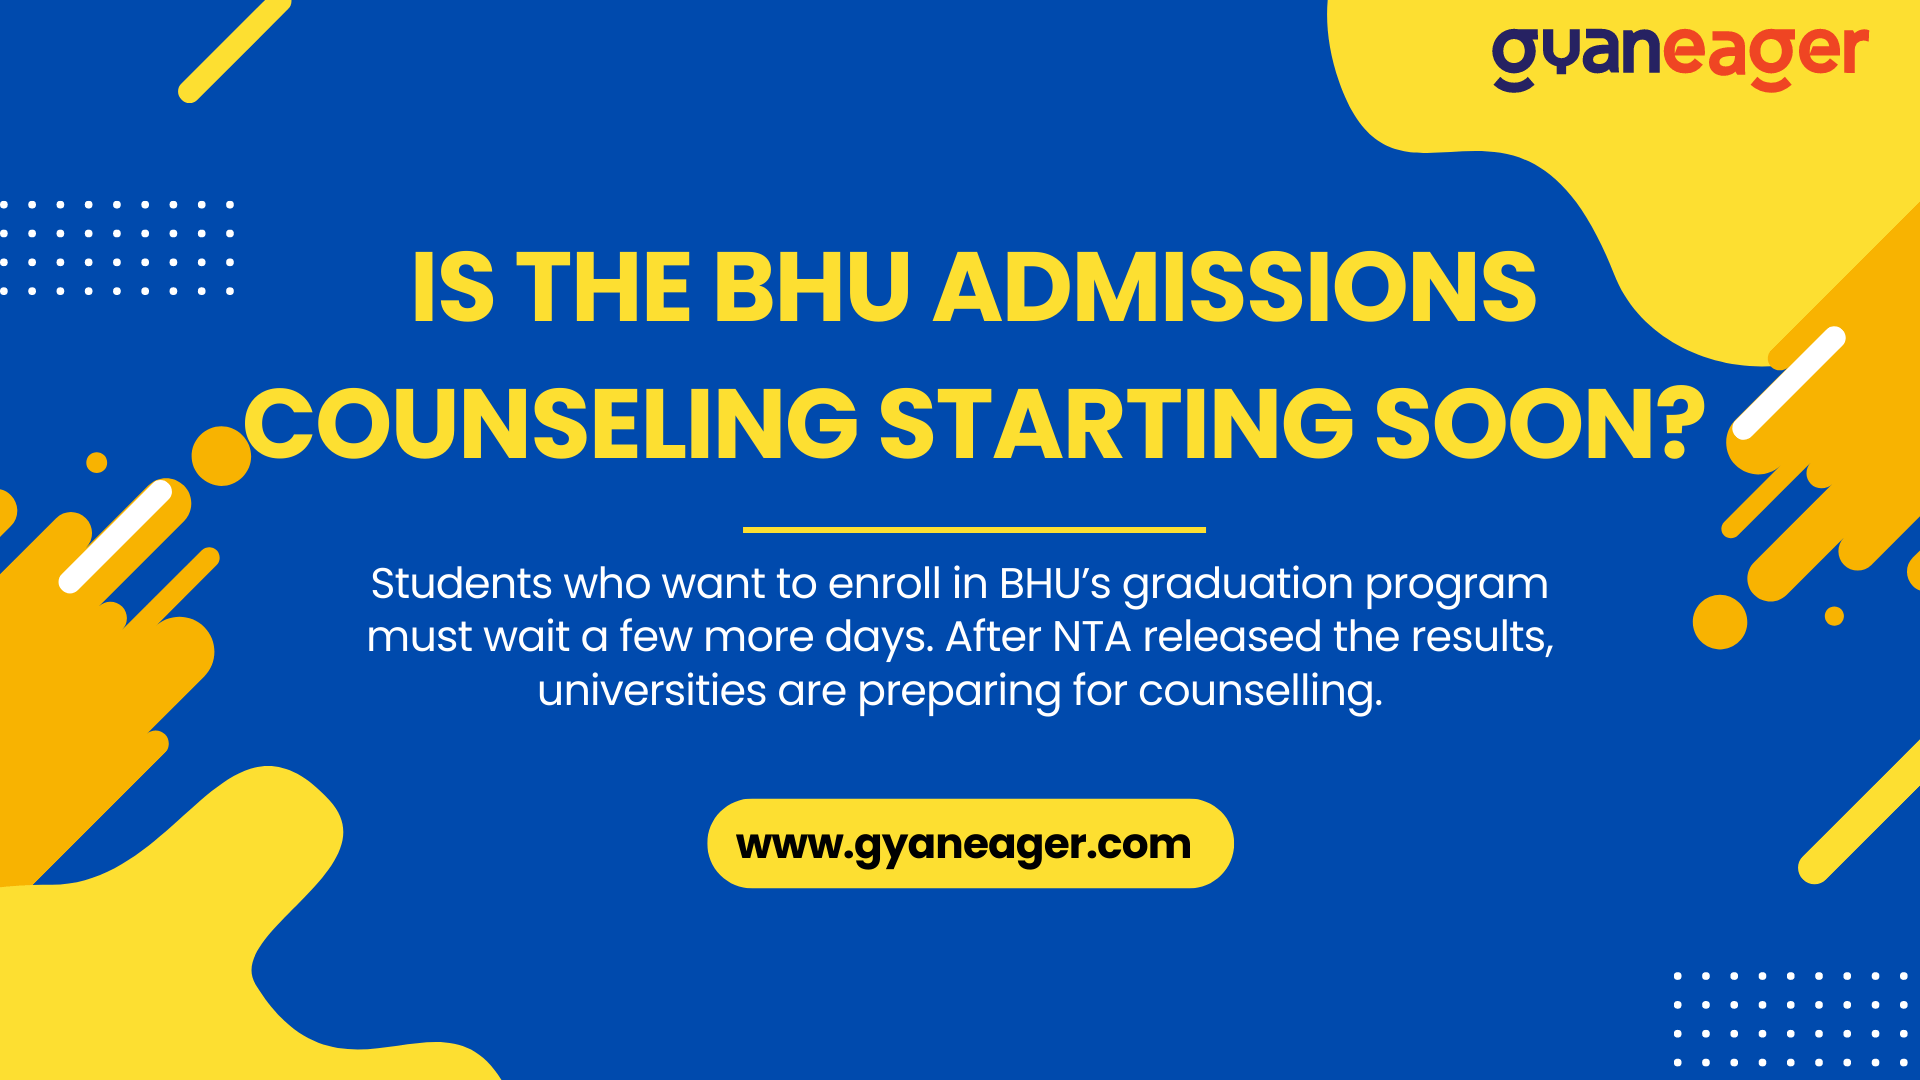 BHU admissions counseling starting soon